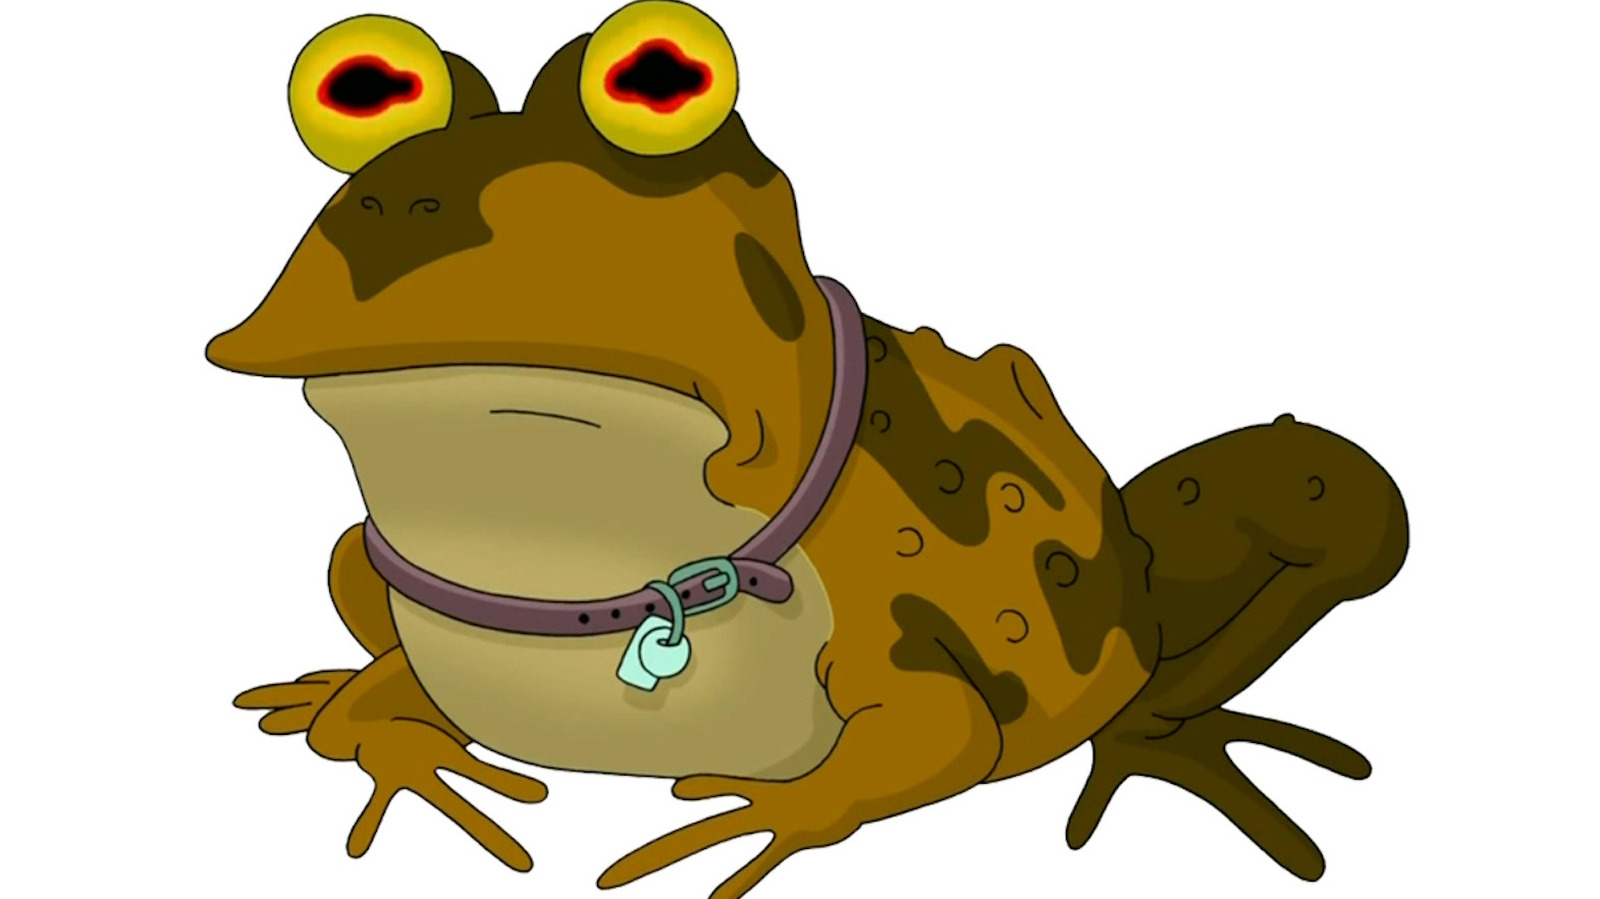 #The Design Of Futurama’s Hypnotoad Was A Subtle Nod To The Simpsons